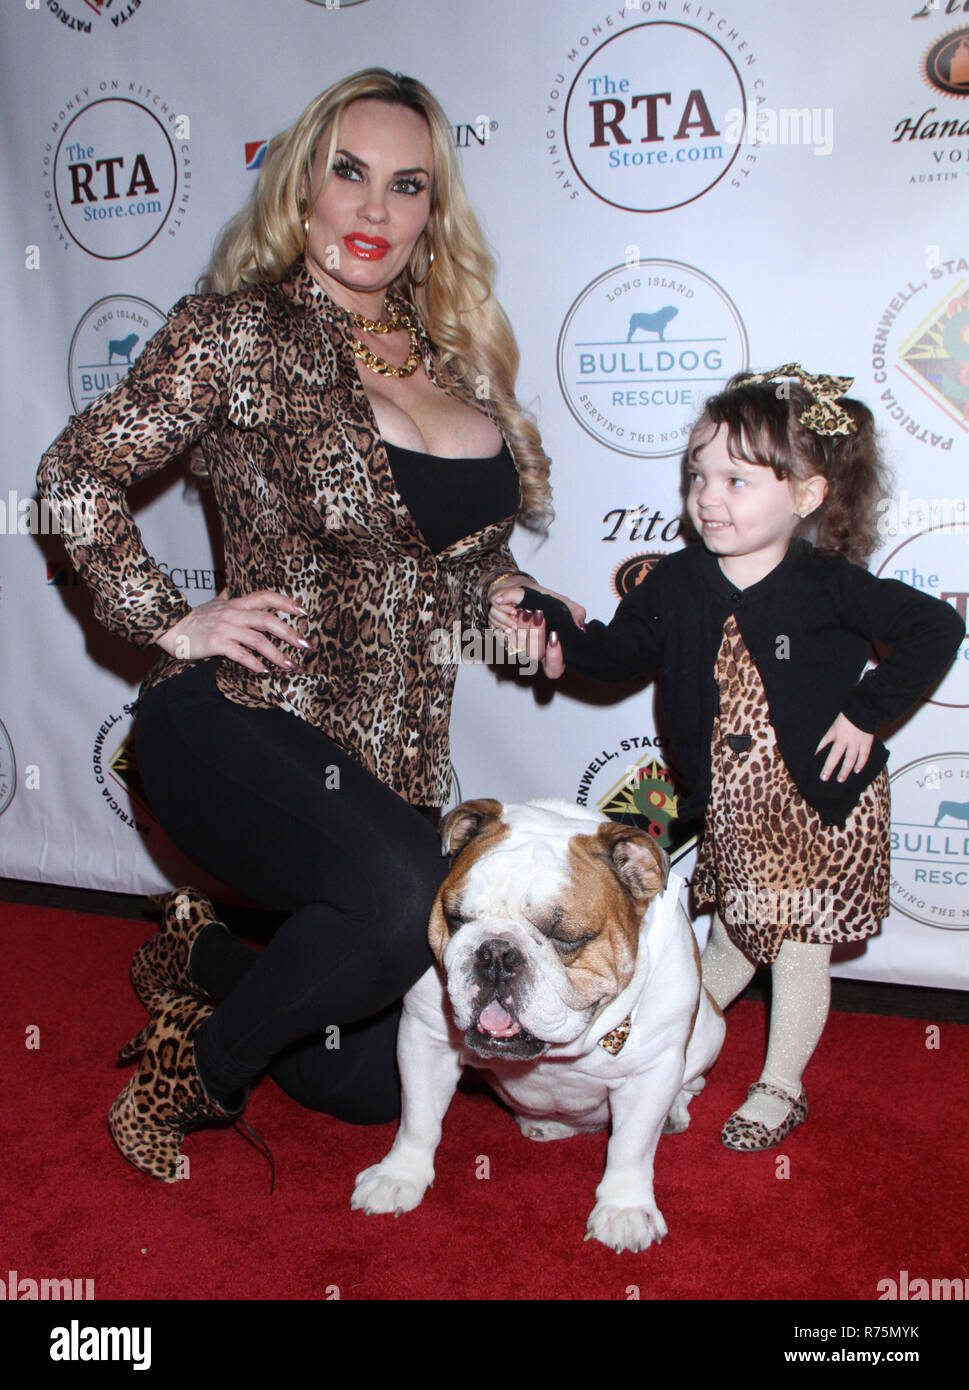 New York, NY, USA. 07th Dec, 2018. Coco Austin, Maximus and Chanel Nicole Marrow host Bash For Fhe Bulldogs at the NYU Rosenthal Pavilion Kimmel Center in New York. December 07, 2018 Credit: Rw/Media Punch/Alamy Live News Stock Photo